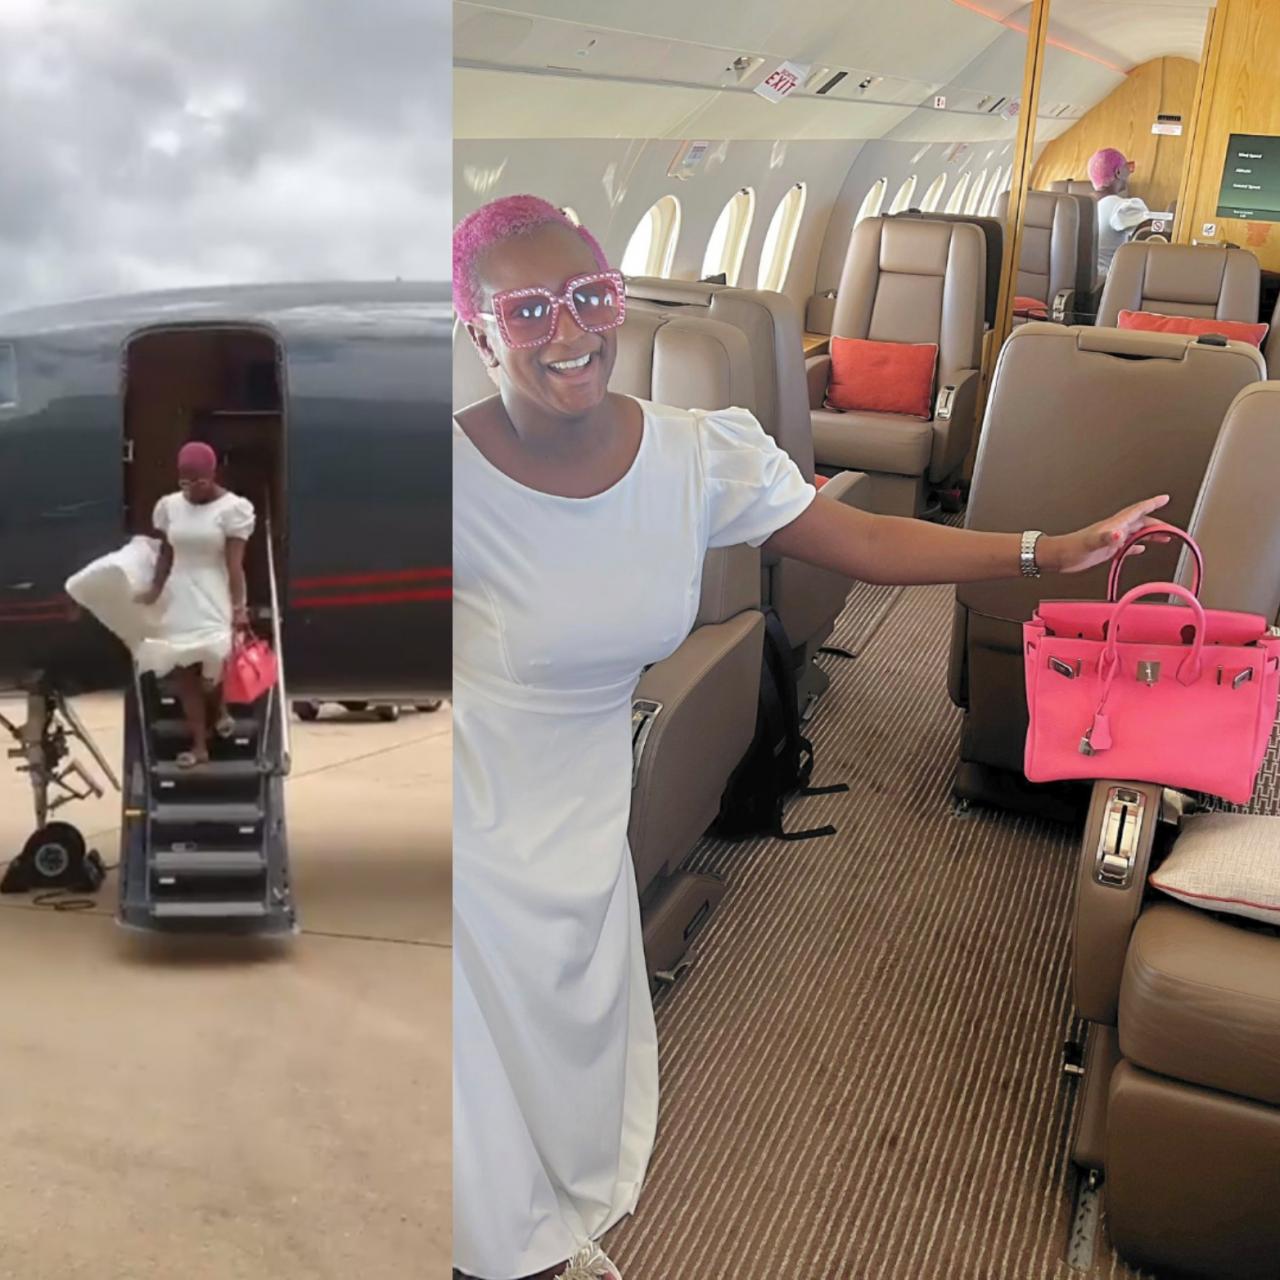 "I clearly need more friends" DJ Cuppy says as she flies alone on private jet